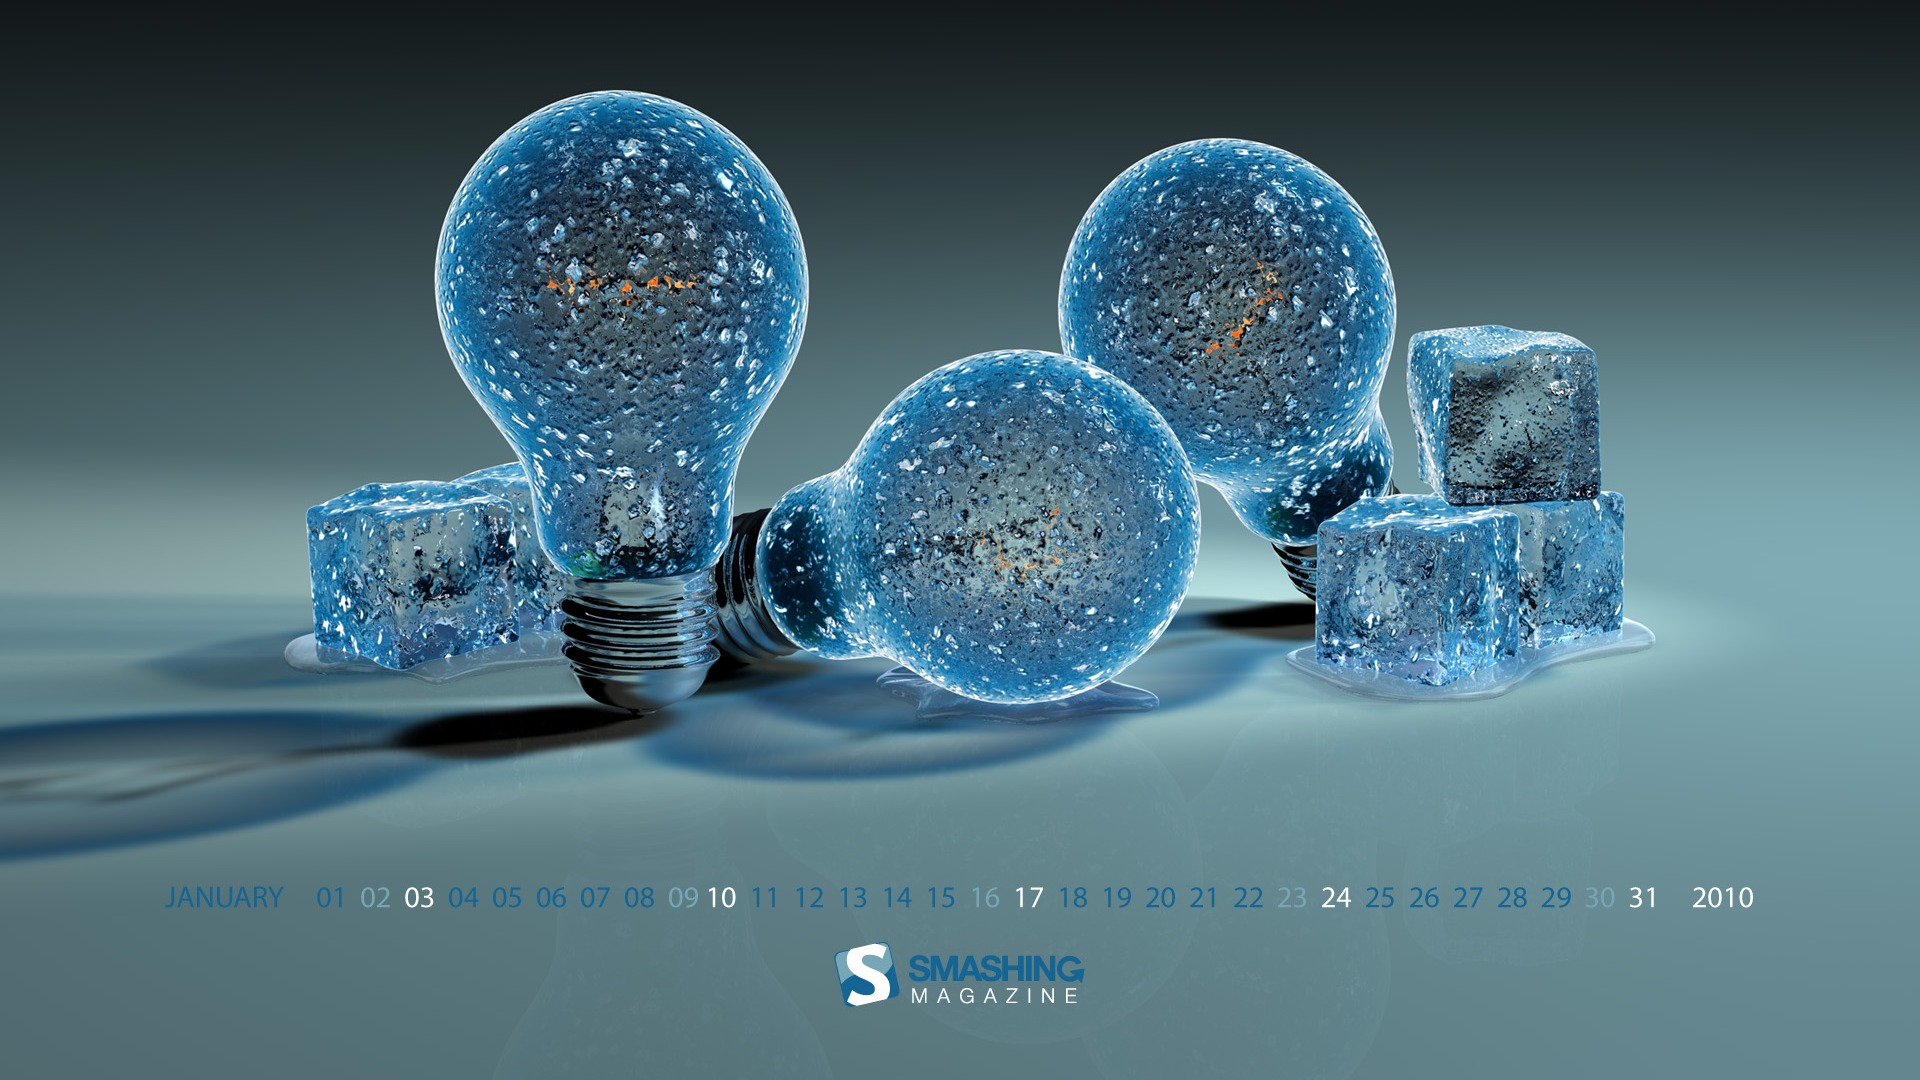 Microsoft Official Win7 New Year Wallpapers #6 - 1920x1080